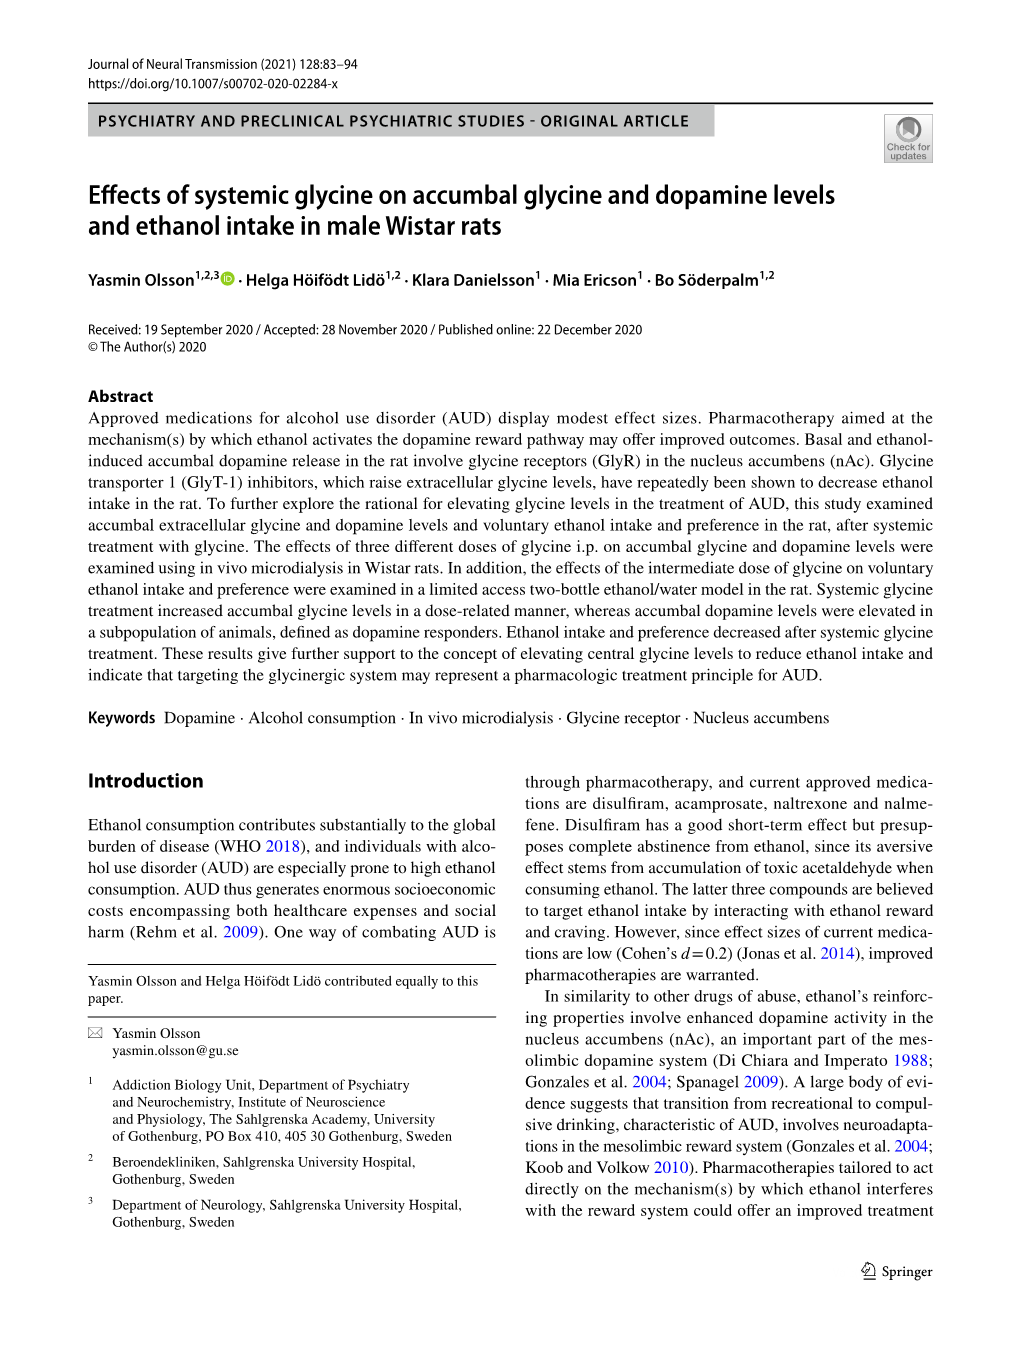 Effects of Systemic Glycine on Accumbal Glycine and Dopamine